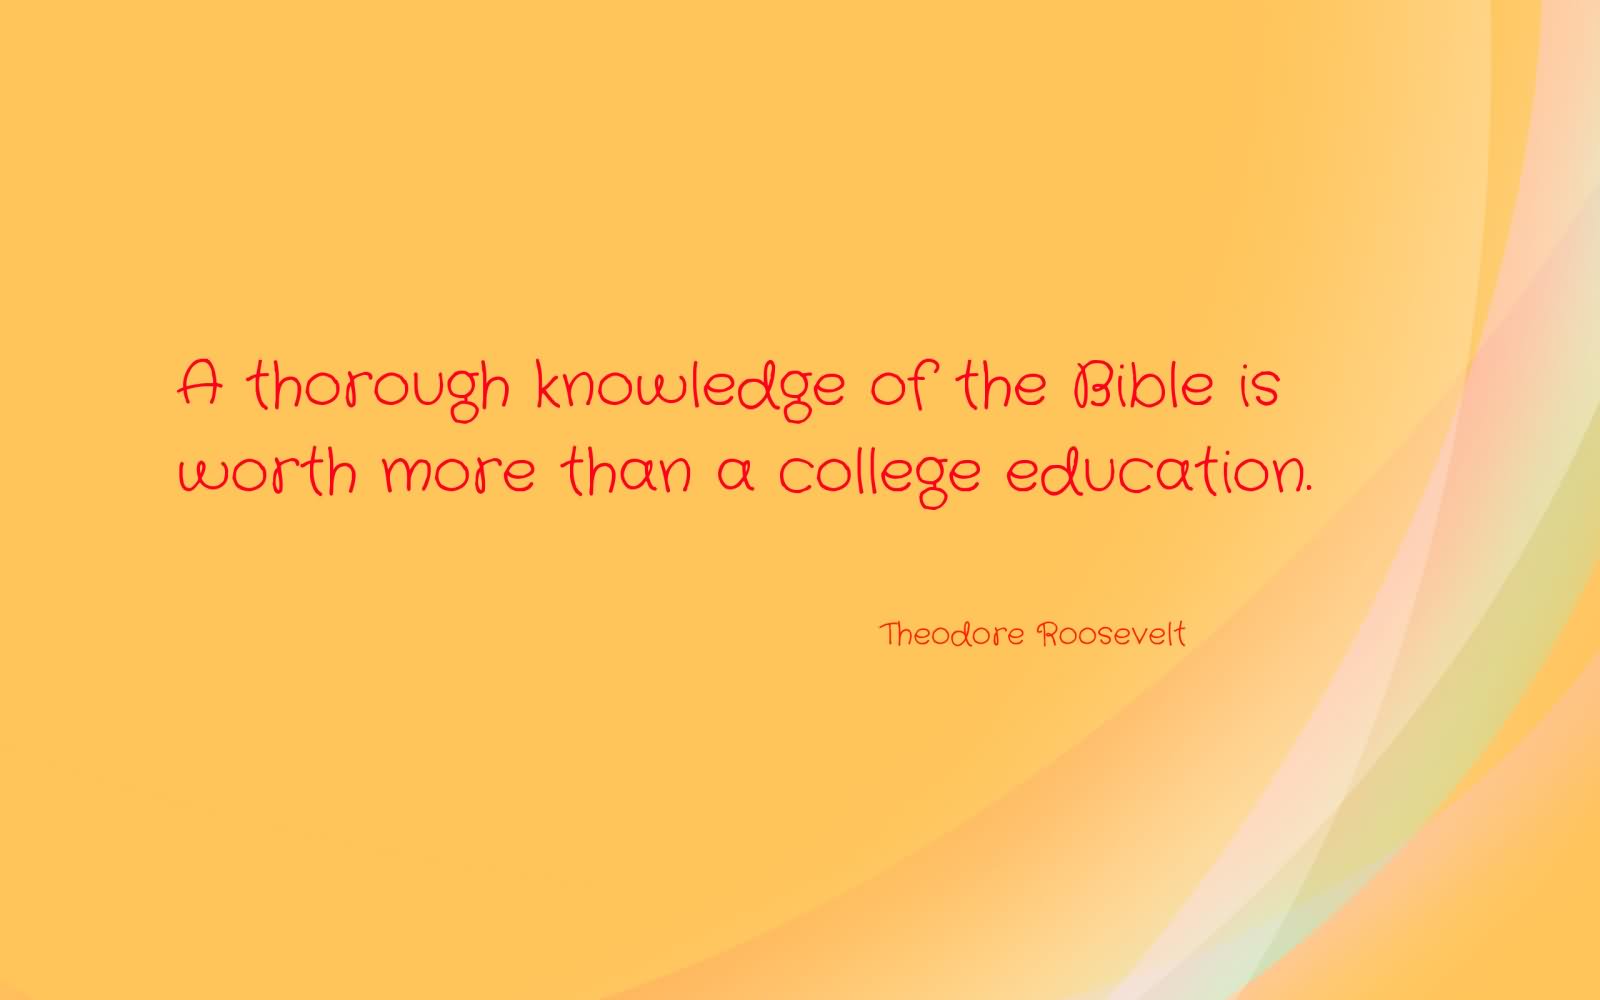 A thorough knowledge of the Bible is worth more than a college education. - Theodore Roosevelt